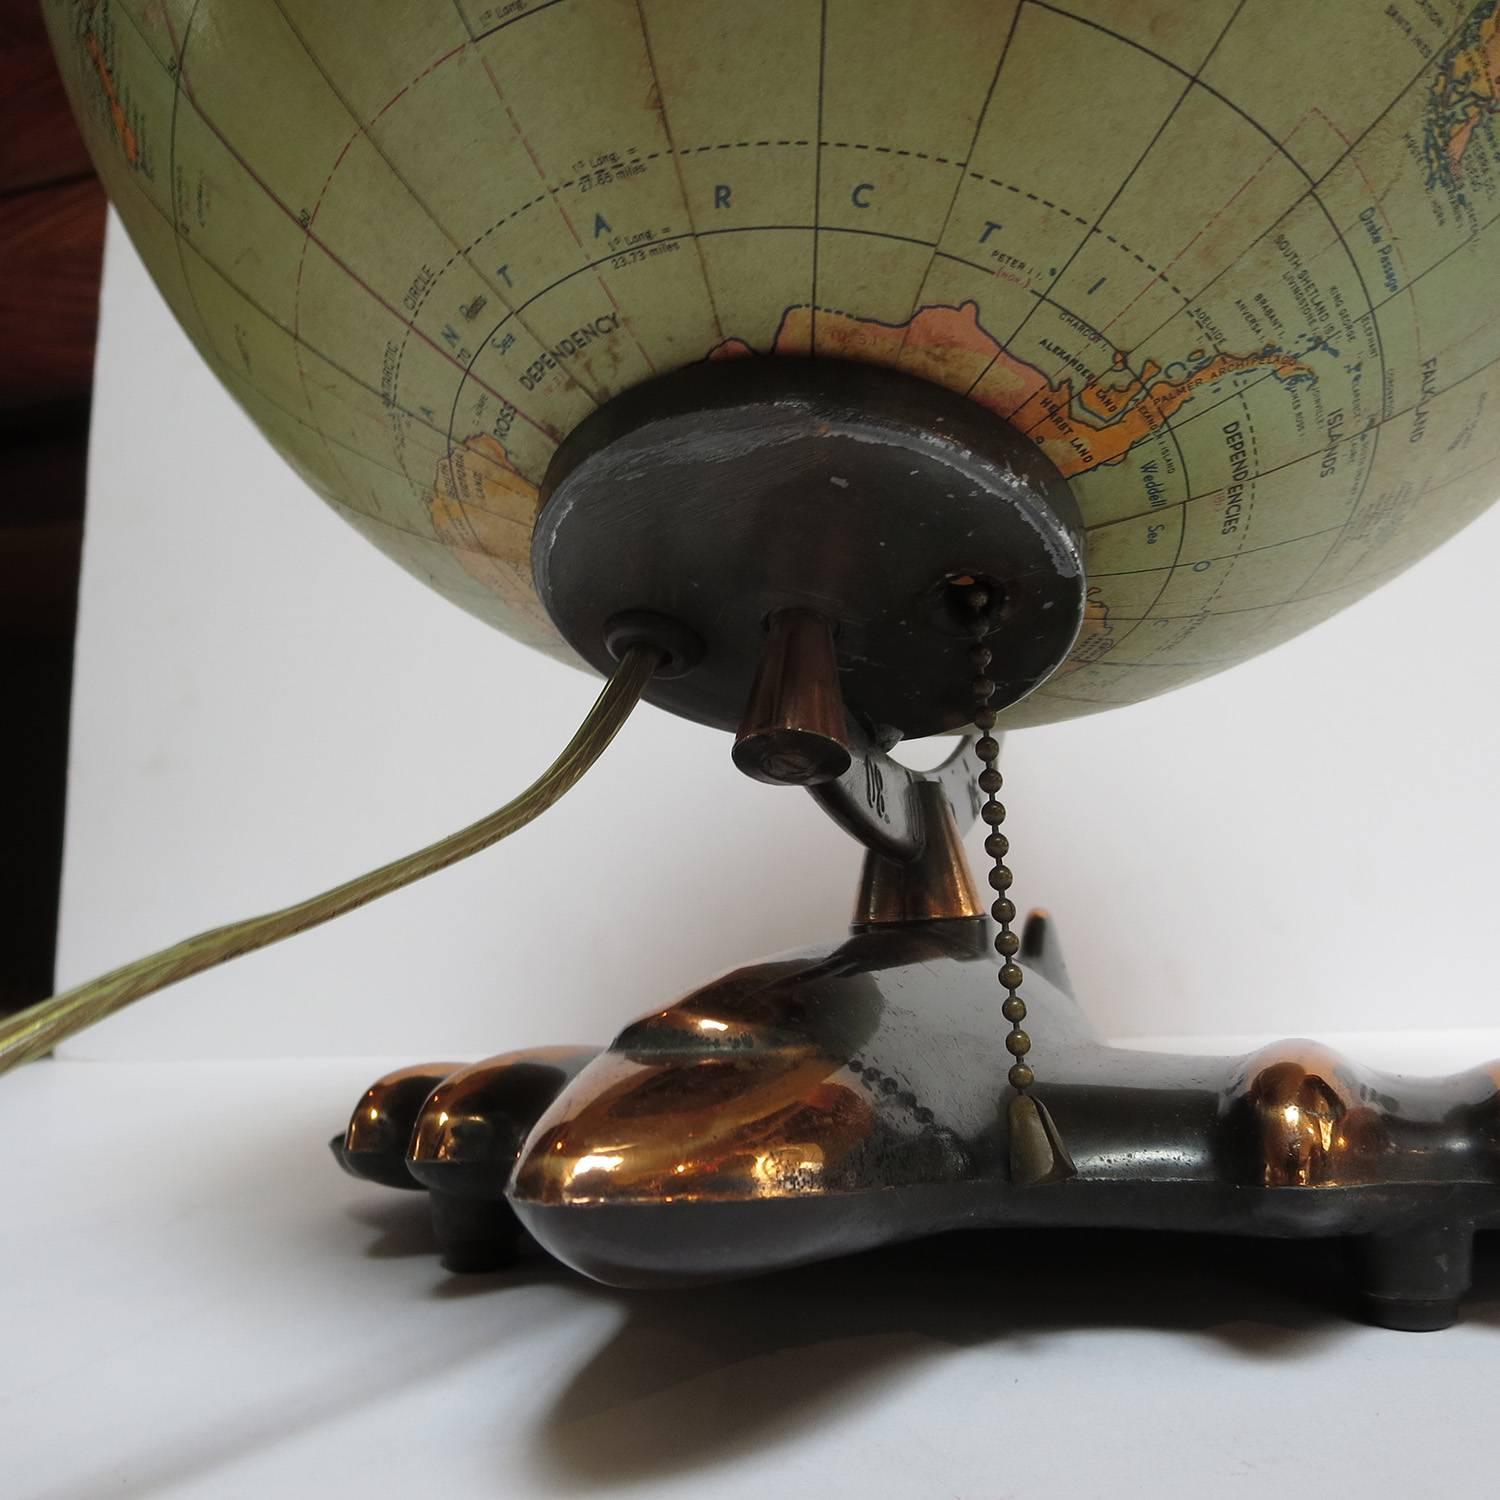 Plated Art Deco Lighted Airplane Globe by Weber-Costello, 1948